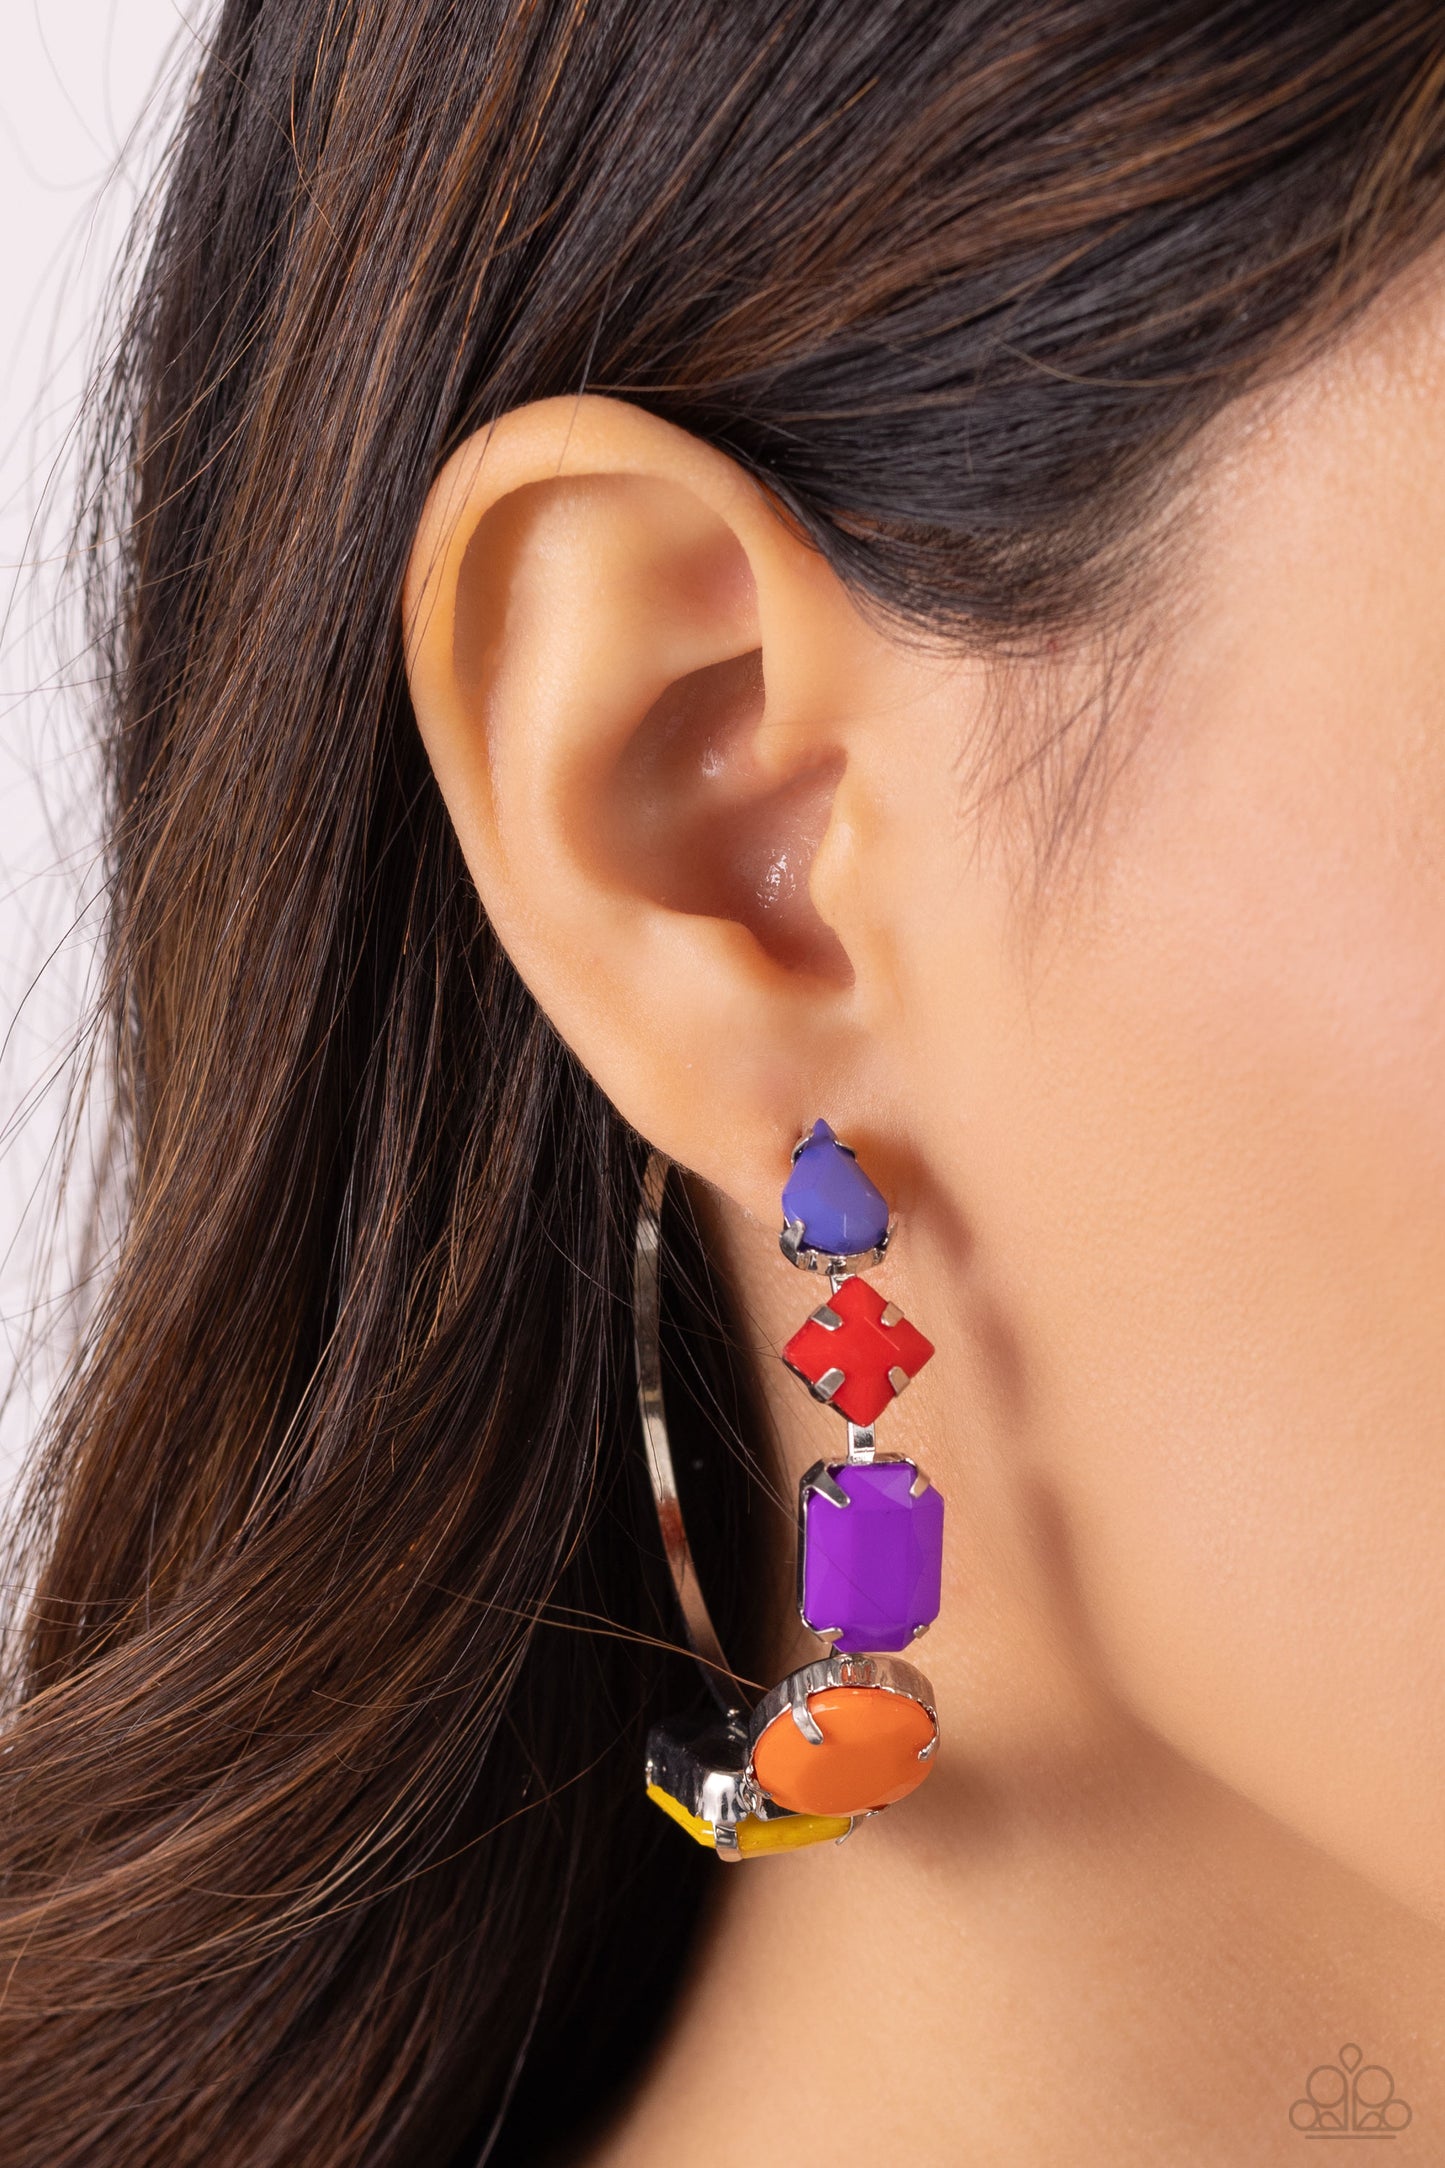 Geometric Gamer Multi Hoop Earring - Paparazzi Accessories  A charming collection of geometrically pronged red, purple, orange, Persian Jewel, and High Visibility shapes gradually increases in size as they adorn the front of a classic silver hoop resulting in a youthful fashion. Earring attaches to a standard post fitting. Hoop measures approximately 2" in diameter.  Sold as one pair of hoop earrings.  P5HO-MTXX-094XX